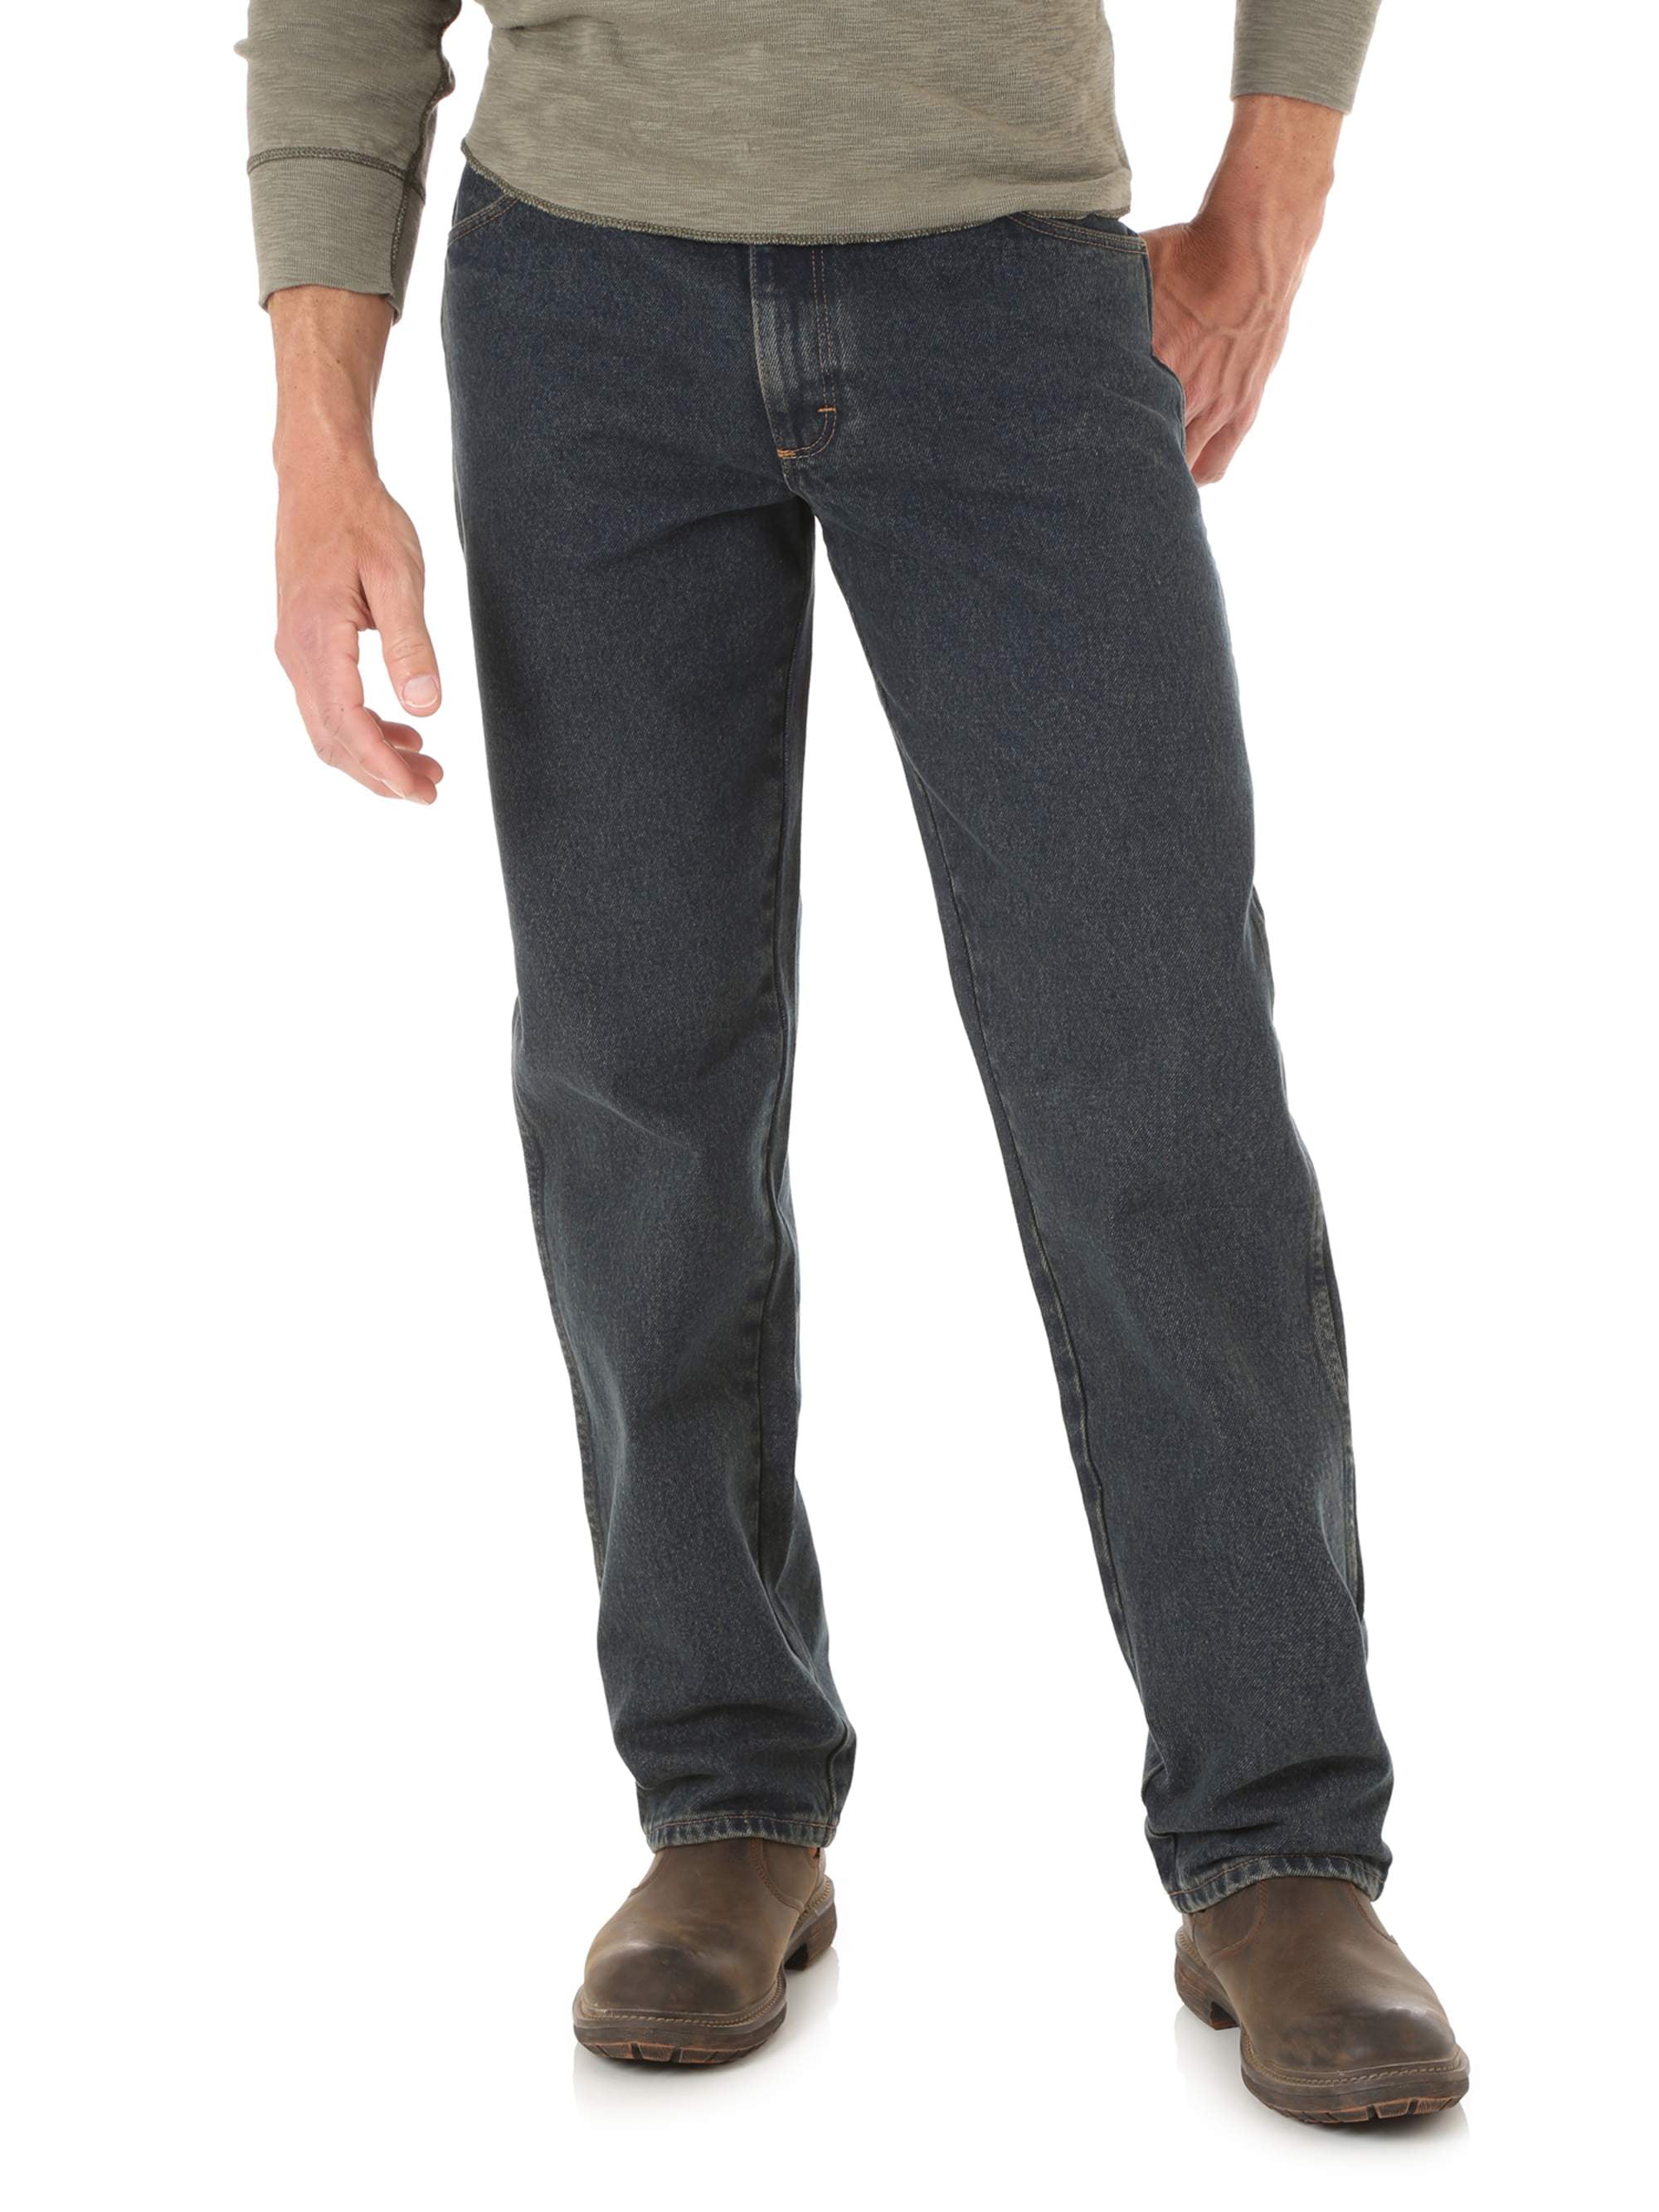 walmart men's relaxed fit jeans